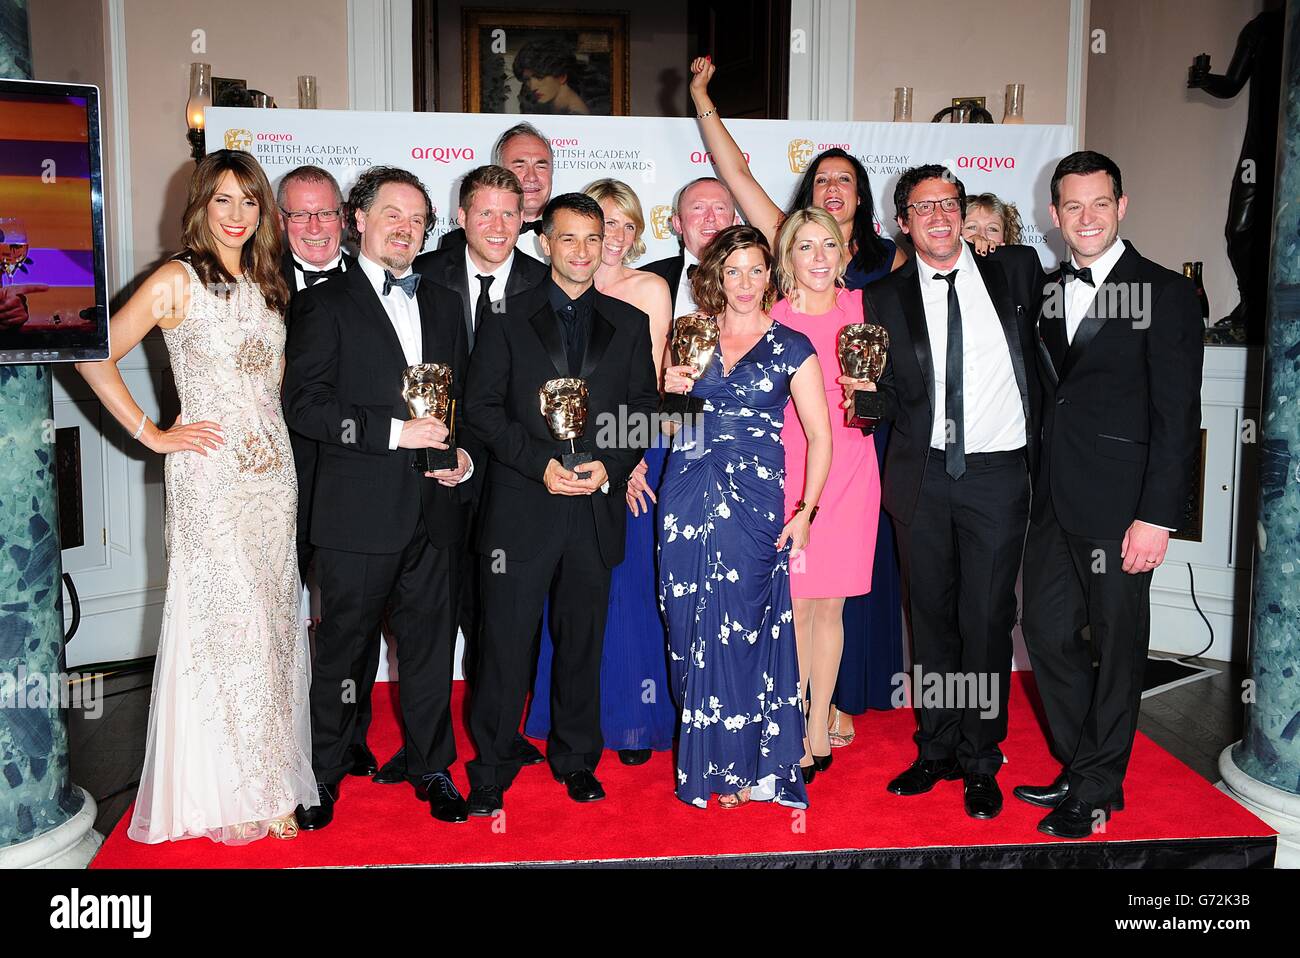 Production crew of Bedlam with the Factual Series Award for Bedlam, alongside presenters Matt Baker (far rigth) and Alex Jones (far left) at the Arqiva British Academy Television Awards 2014 at the Theatre Royal, Drury Lane, London. Stock Photo